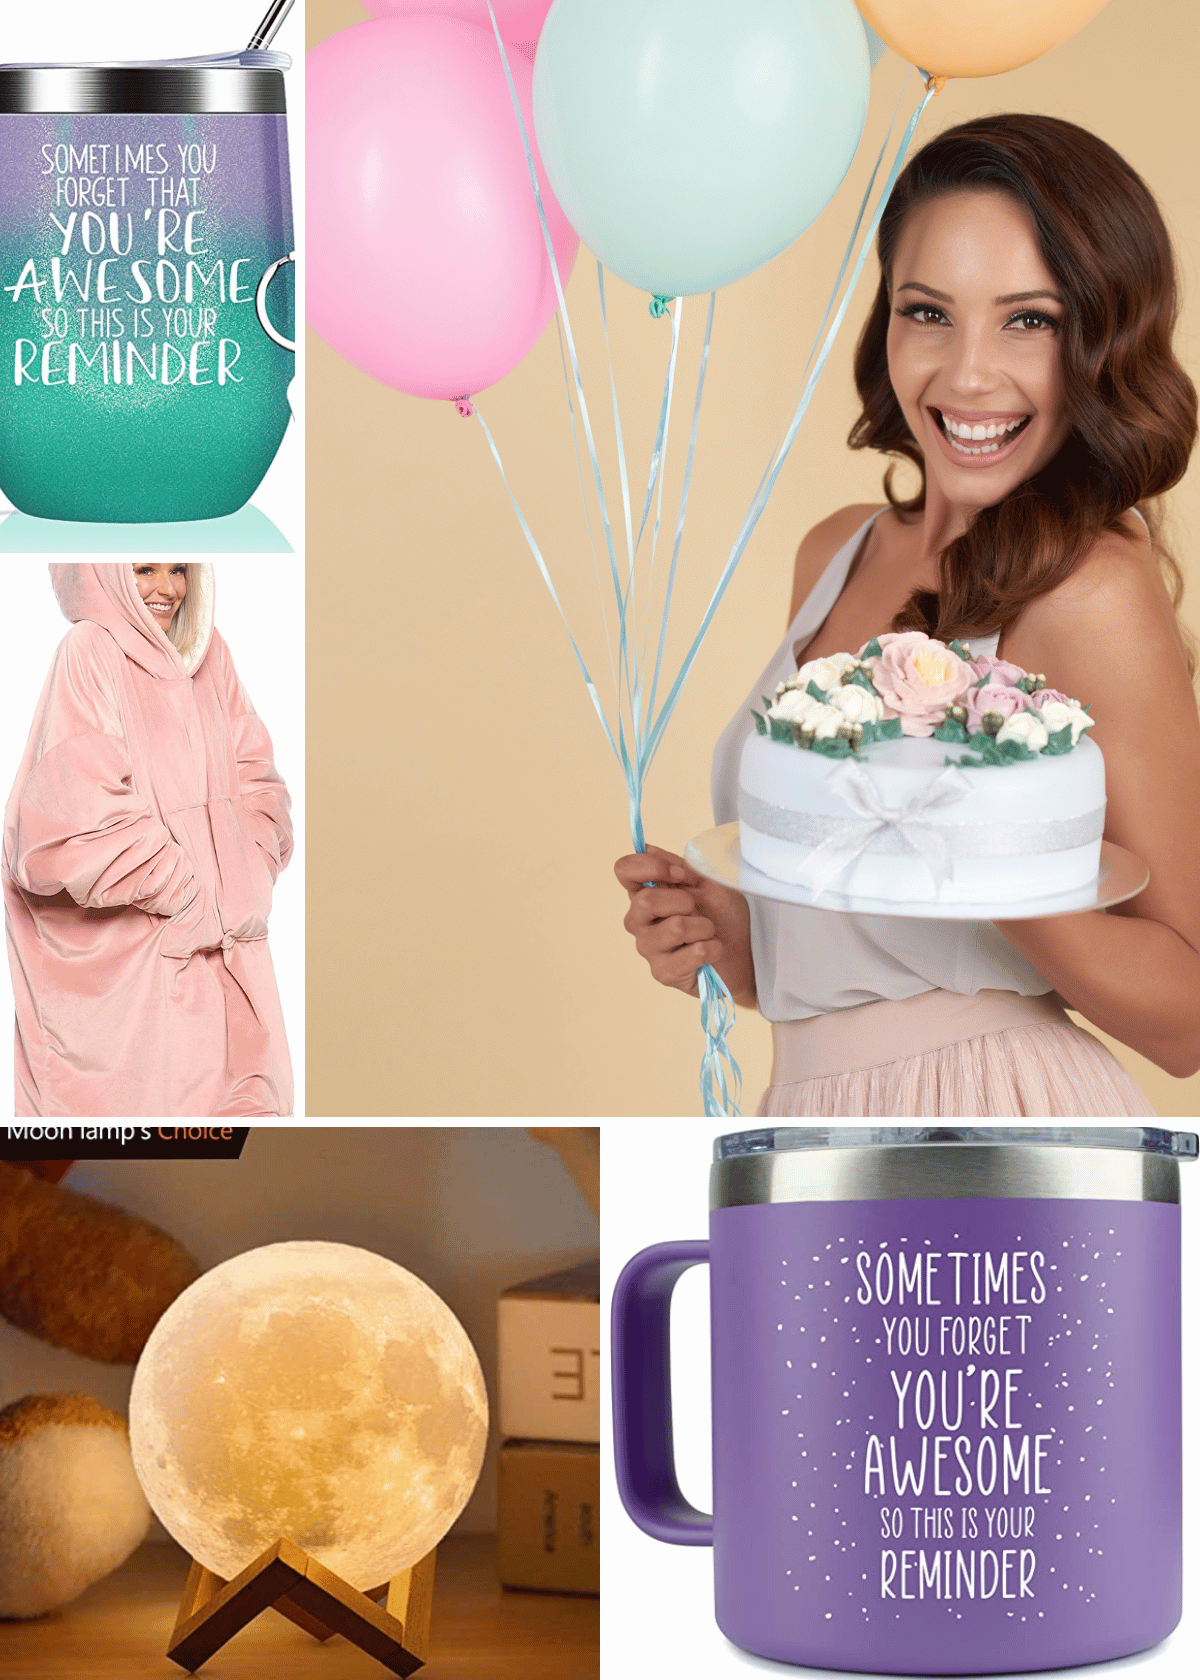 Top 5 Amazon Gifts for College Girls' Birthday Celebration